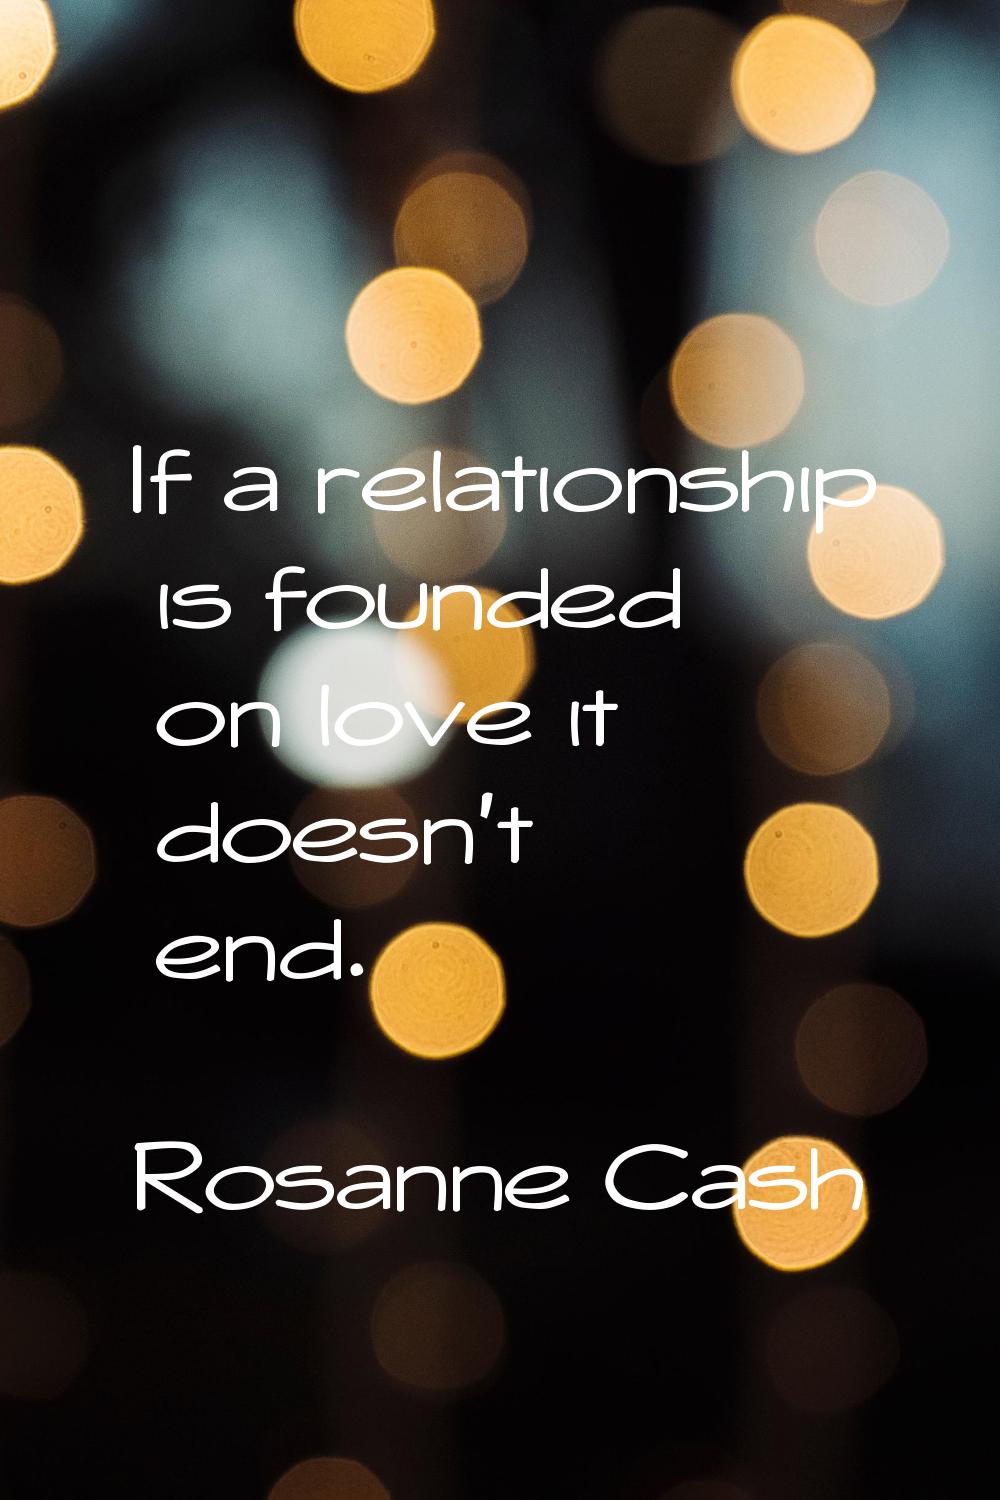 If a relationship is founded on love it doesn't end.